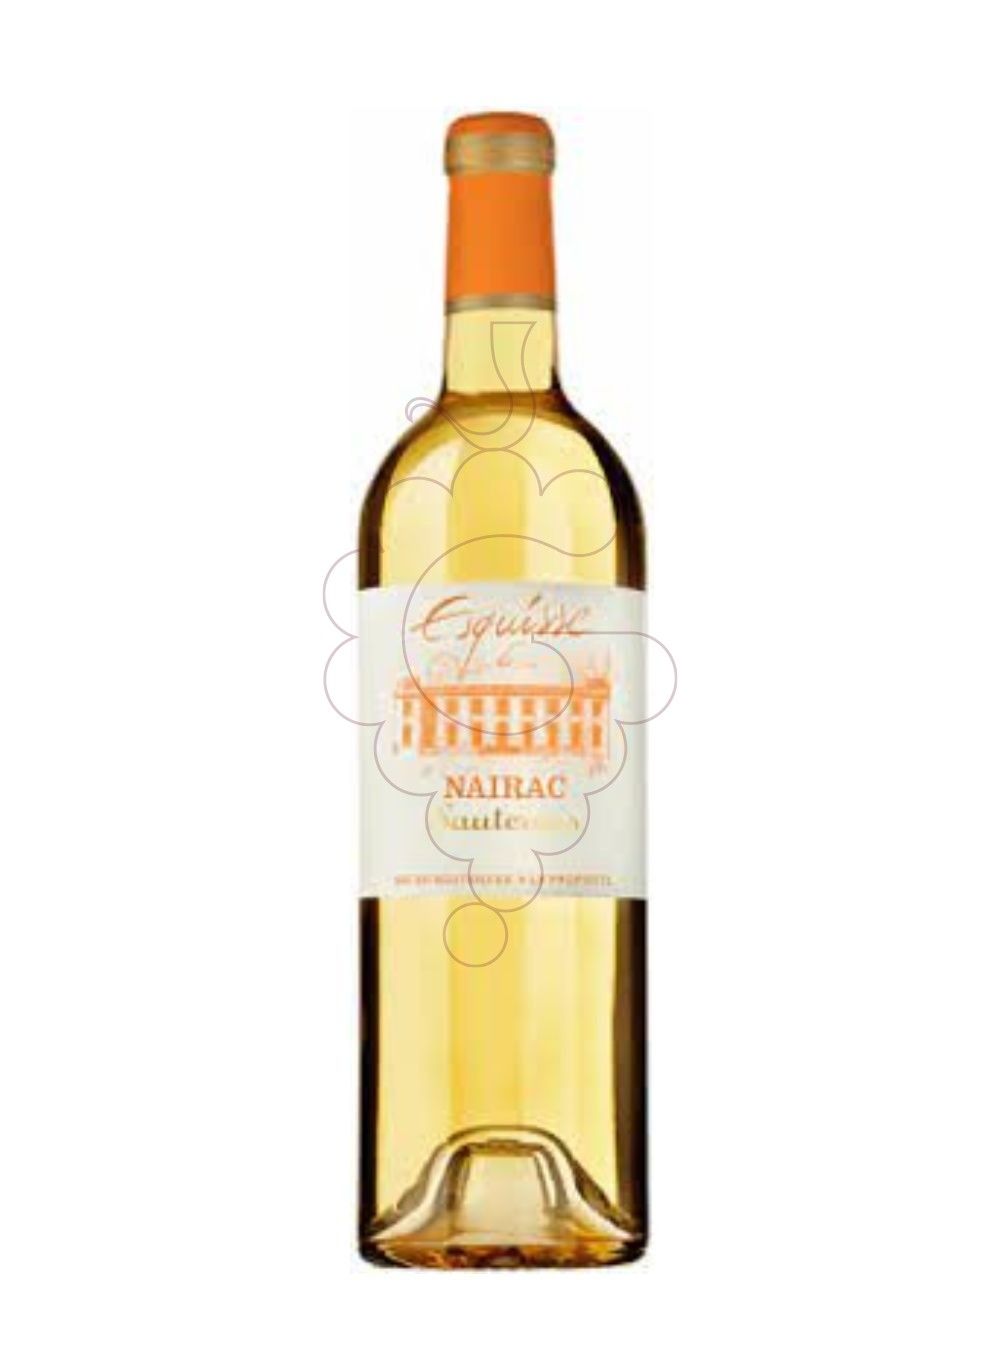 Photo Equisse nairac sauternes 05 75 fortified wine